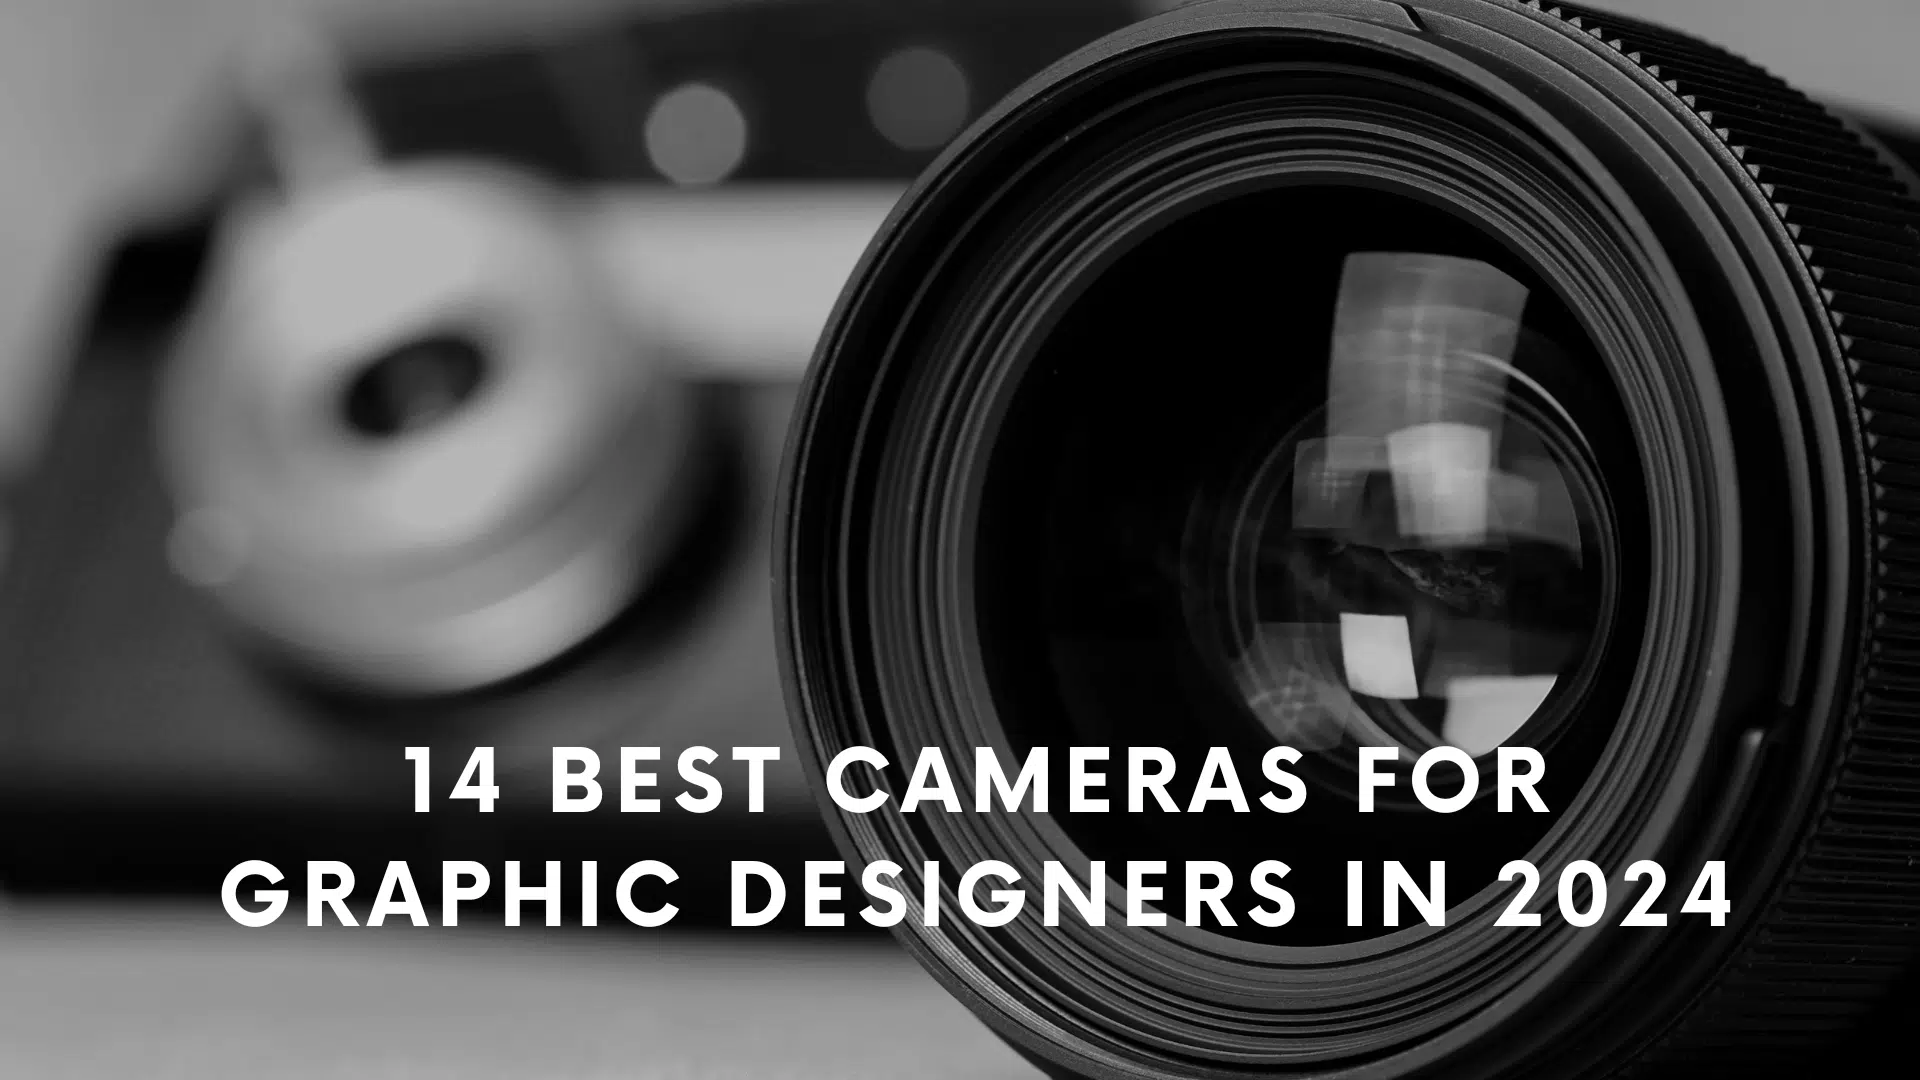 Best Cameras for Graphic Designers